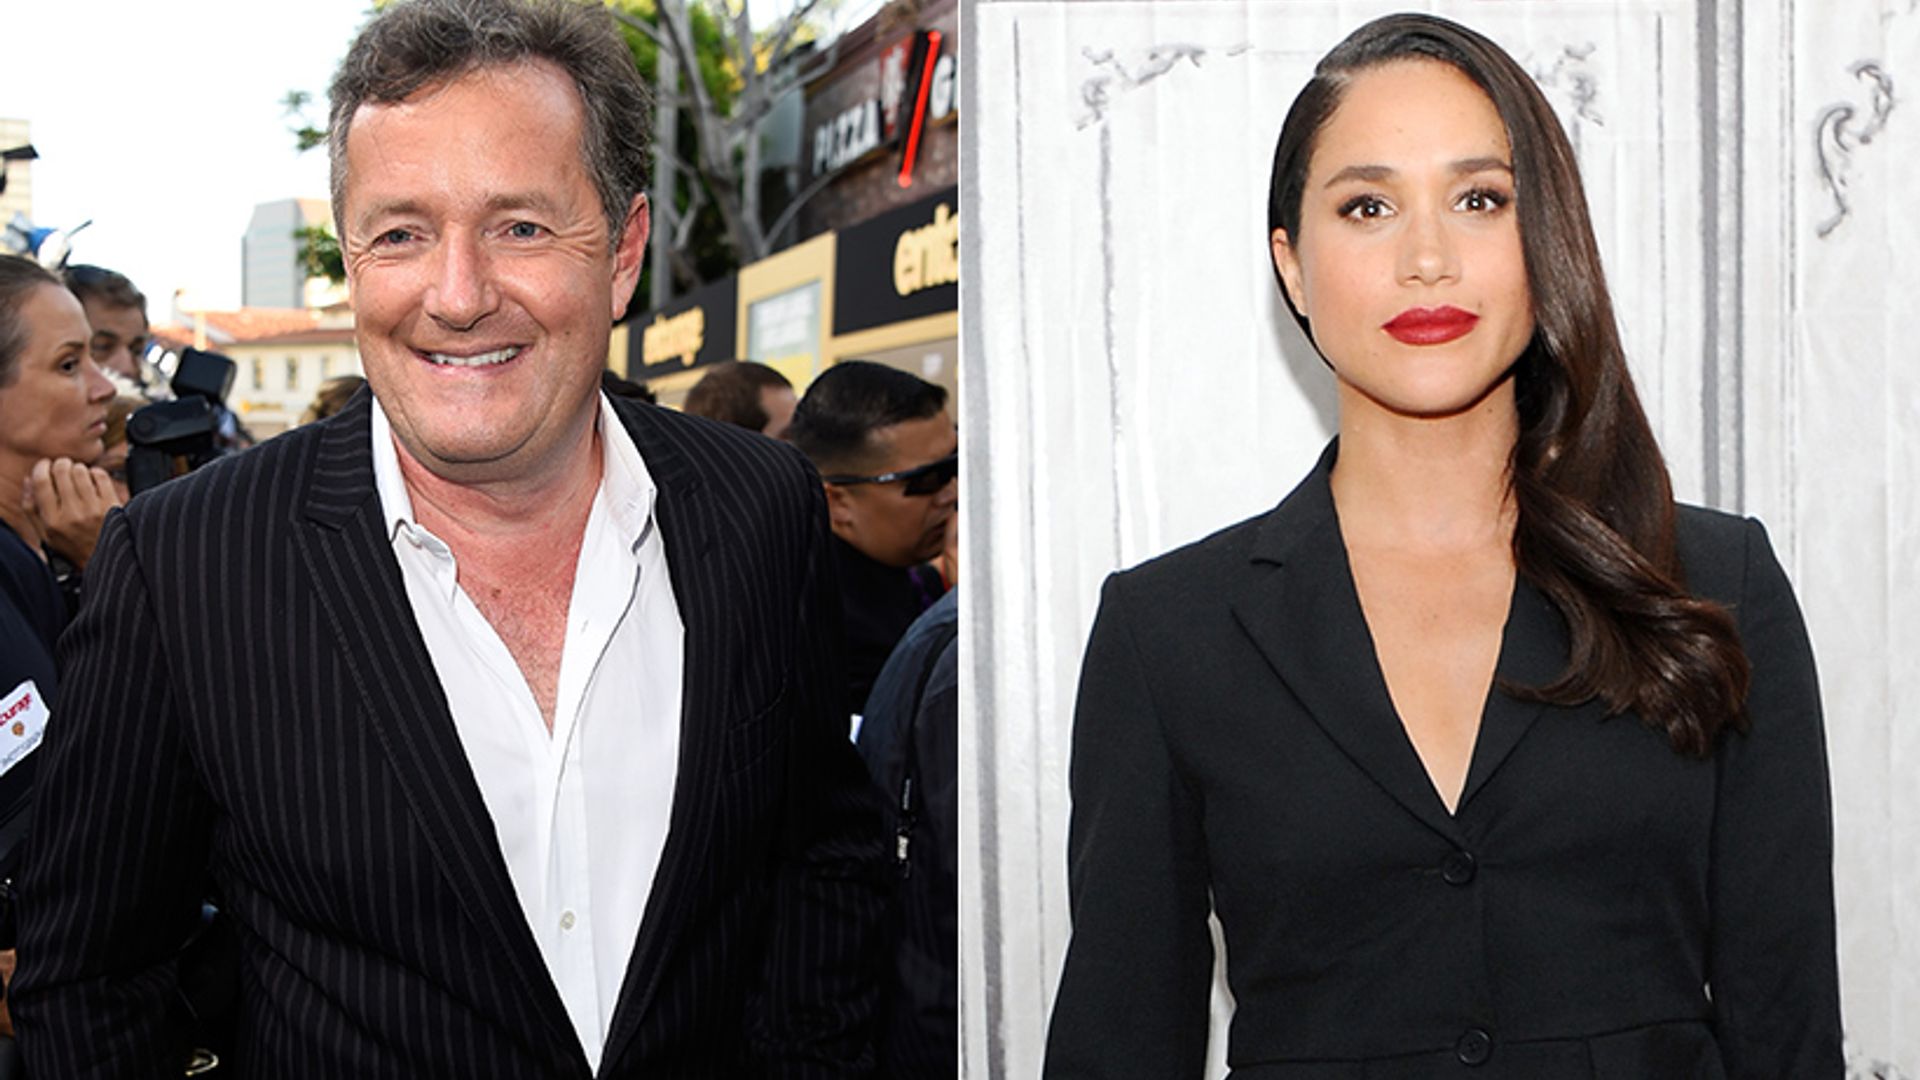 Piers Morgan reveals unlikely friendship with Meghan Markle – and gives Prince Harry dating advice!